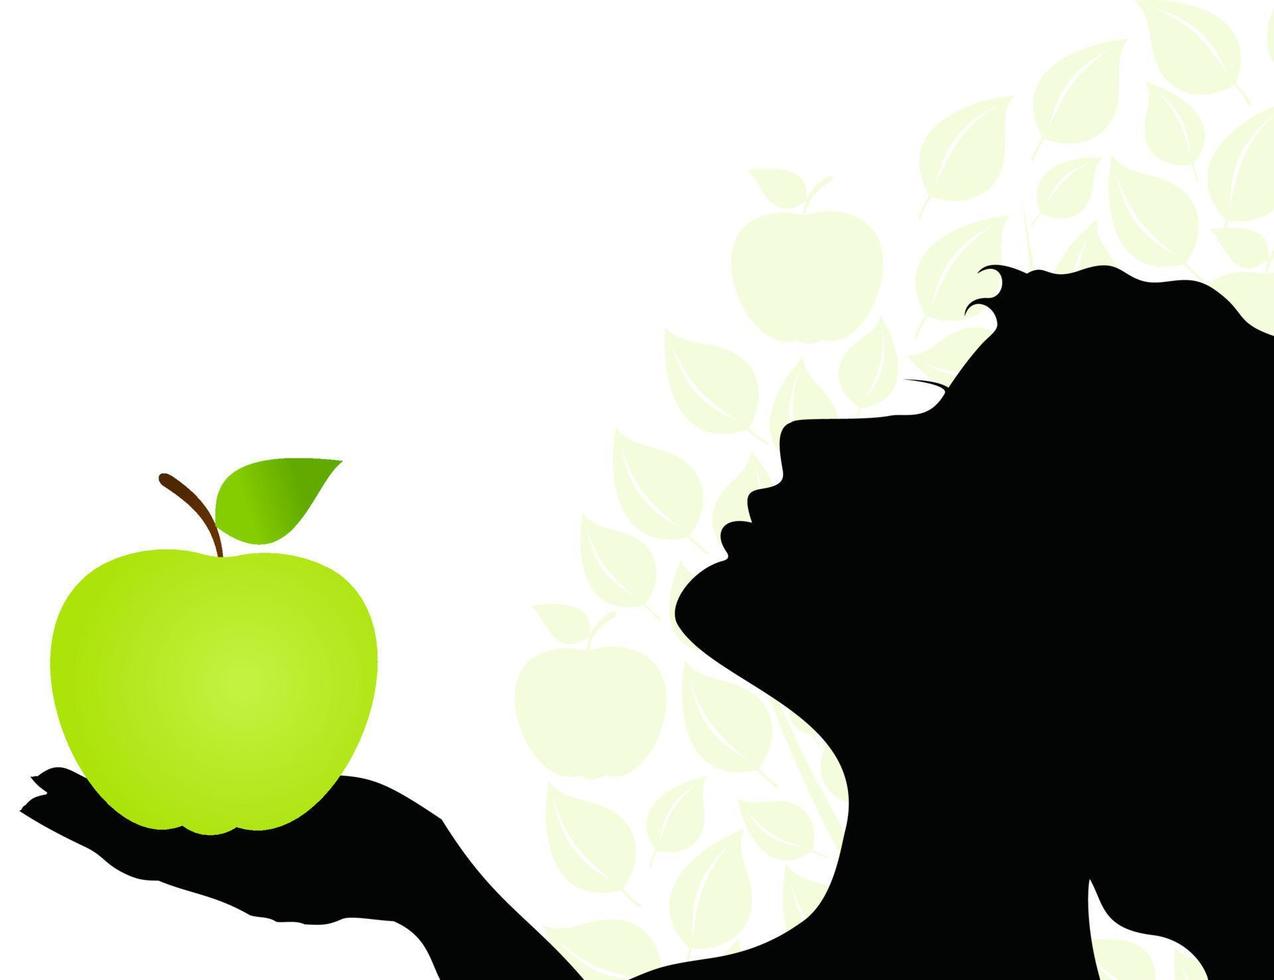 The woman holds a green apple in a hand. A vector illustration